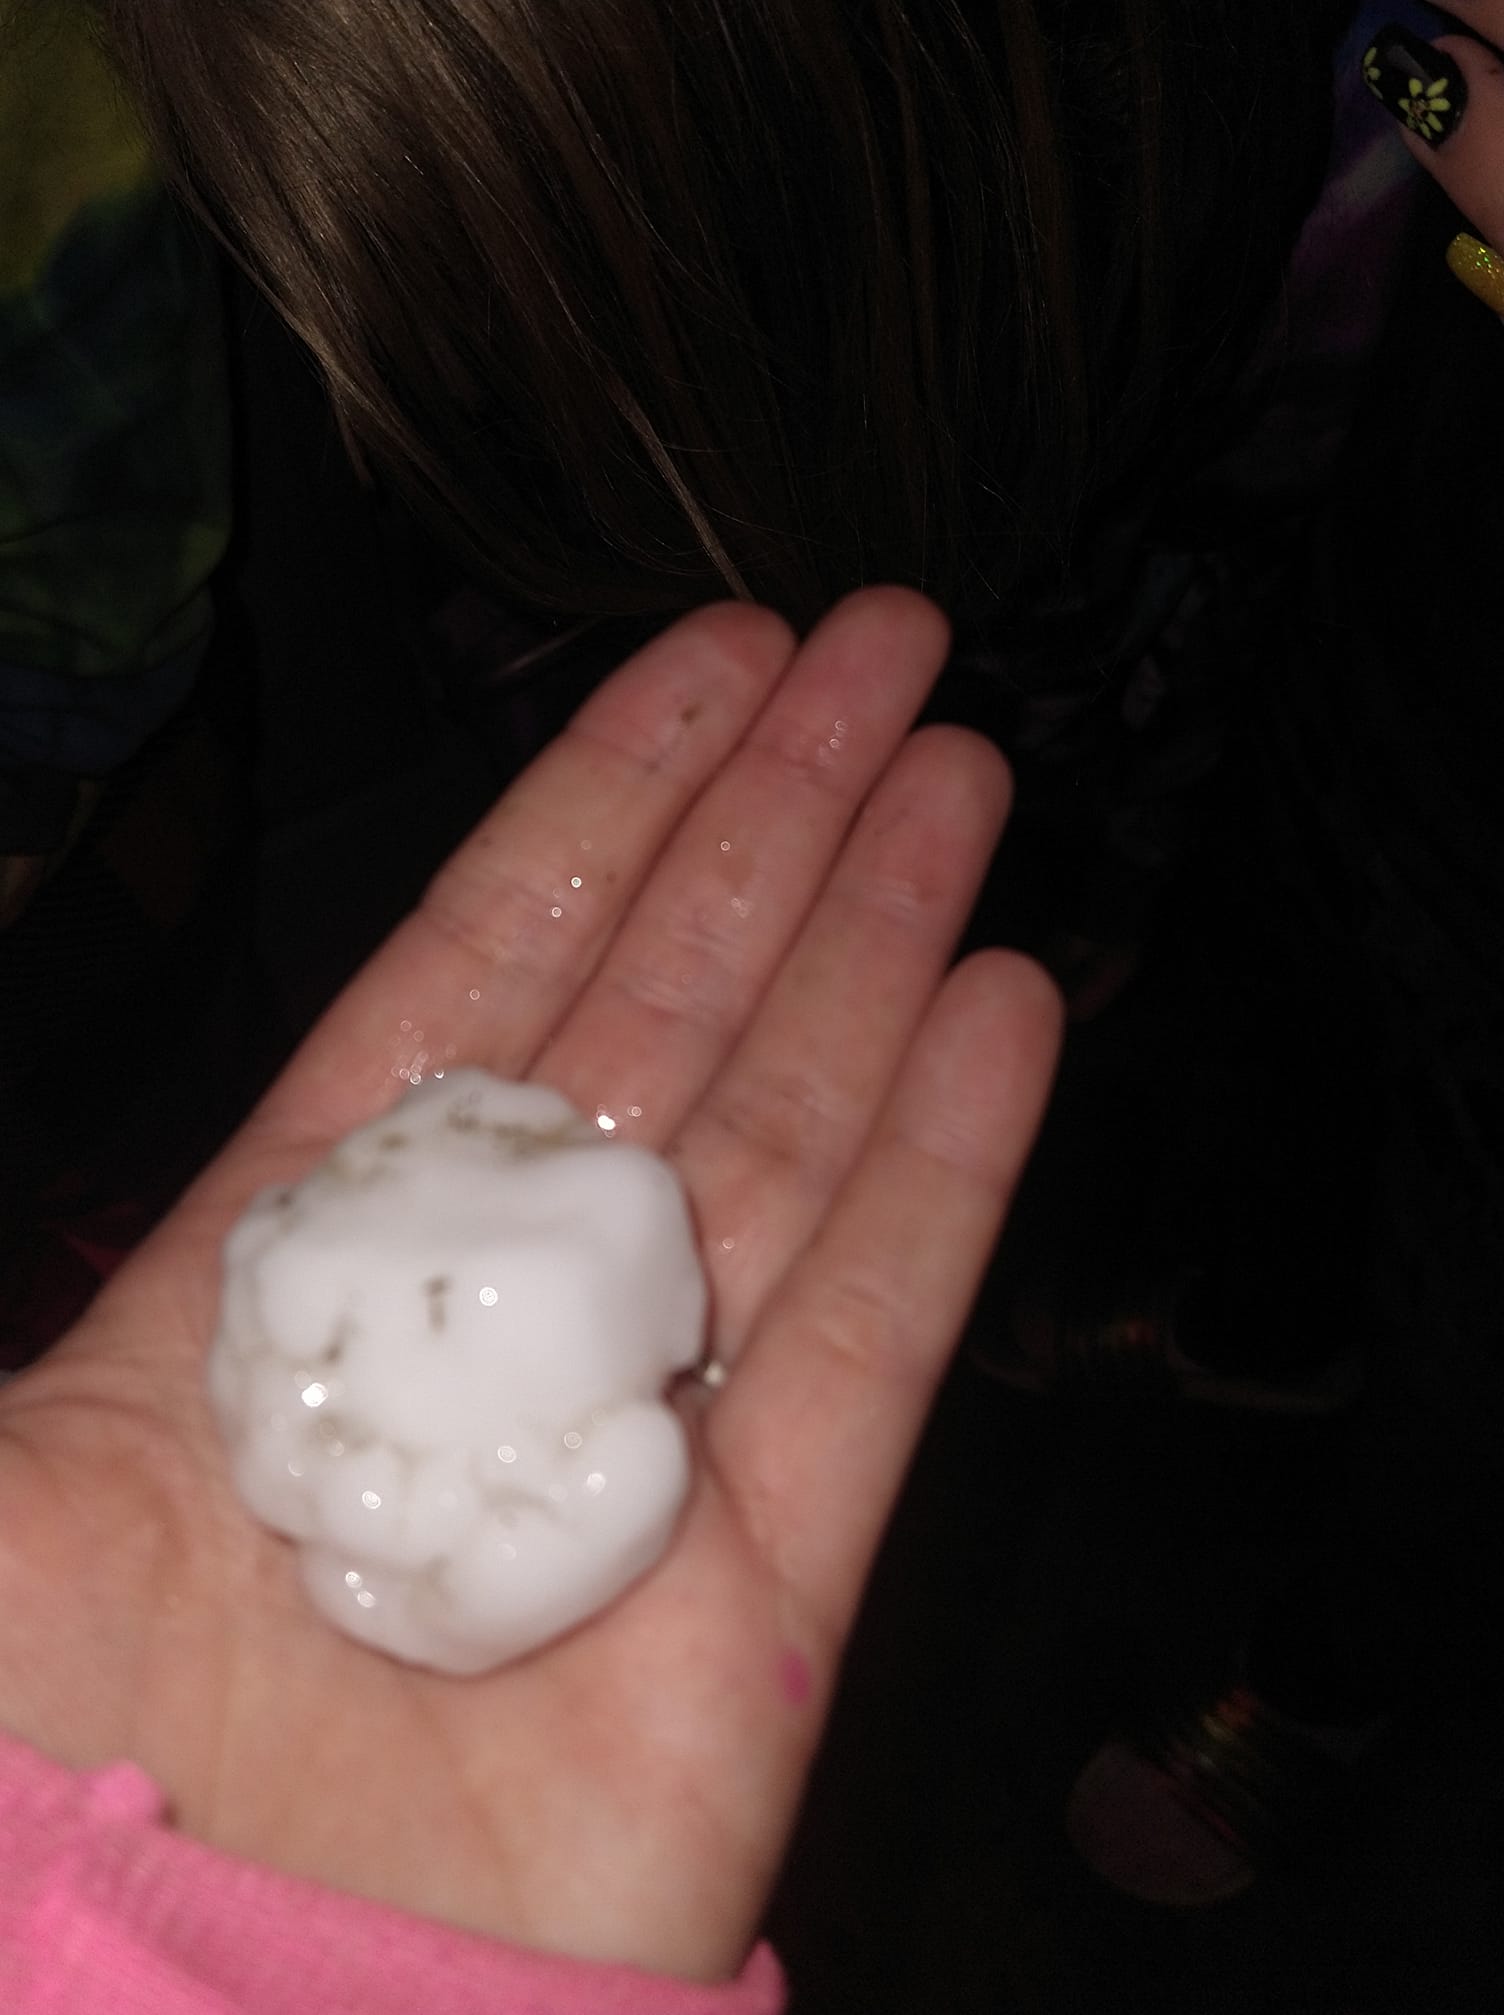 Hand holding golf ball sized, rough hail stone, 5 miles east of Parkston SD